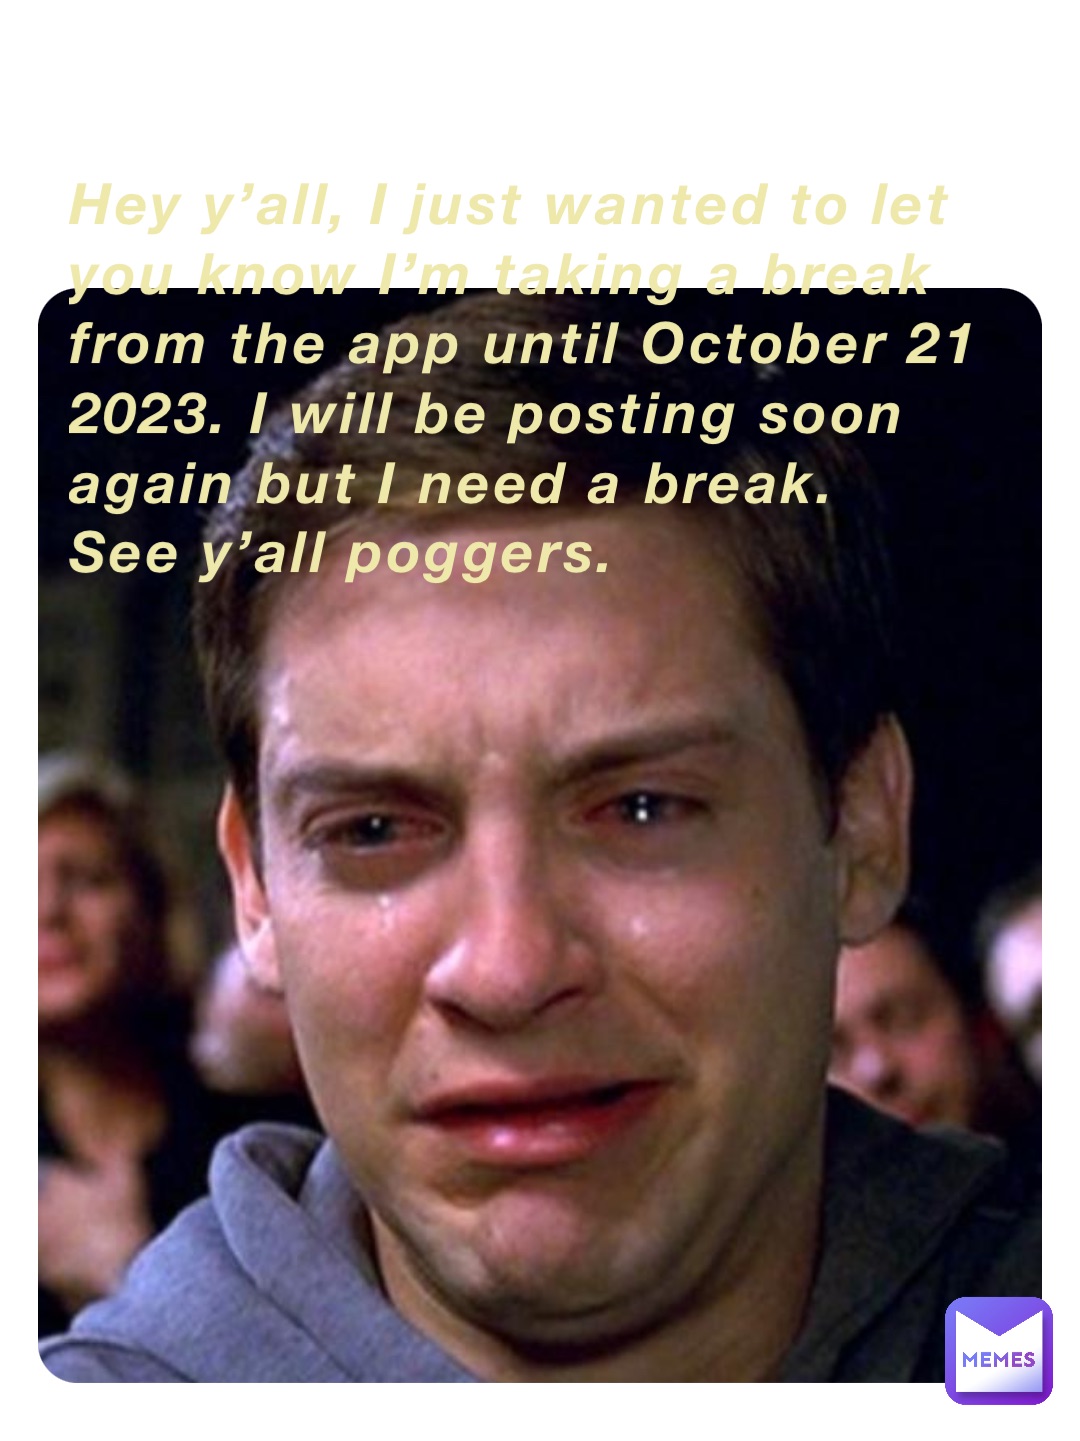 Hey y’all, I just wanted to let you know I’m taking a break from the app until October 21 2023. I will be posting soon again but I need a break. 
See y’all poggers.